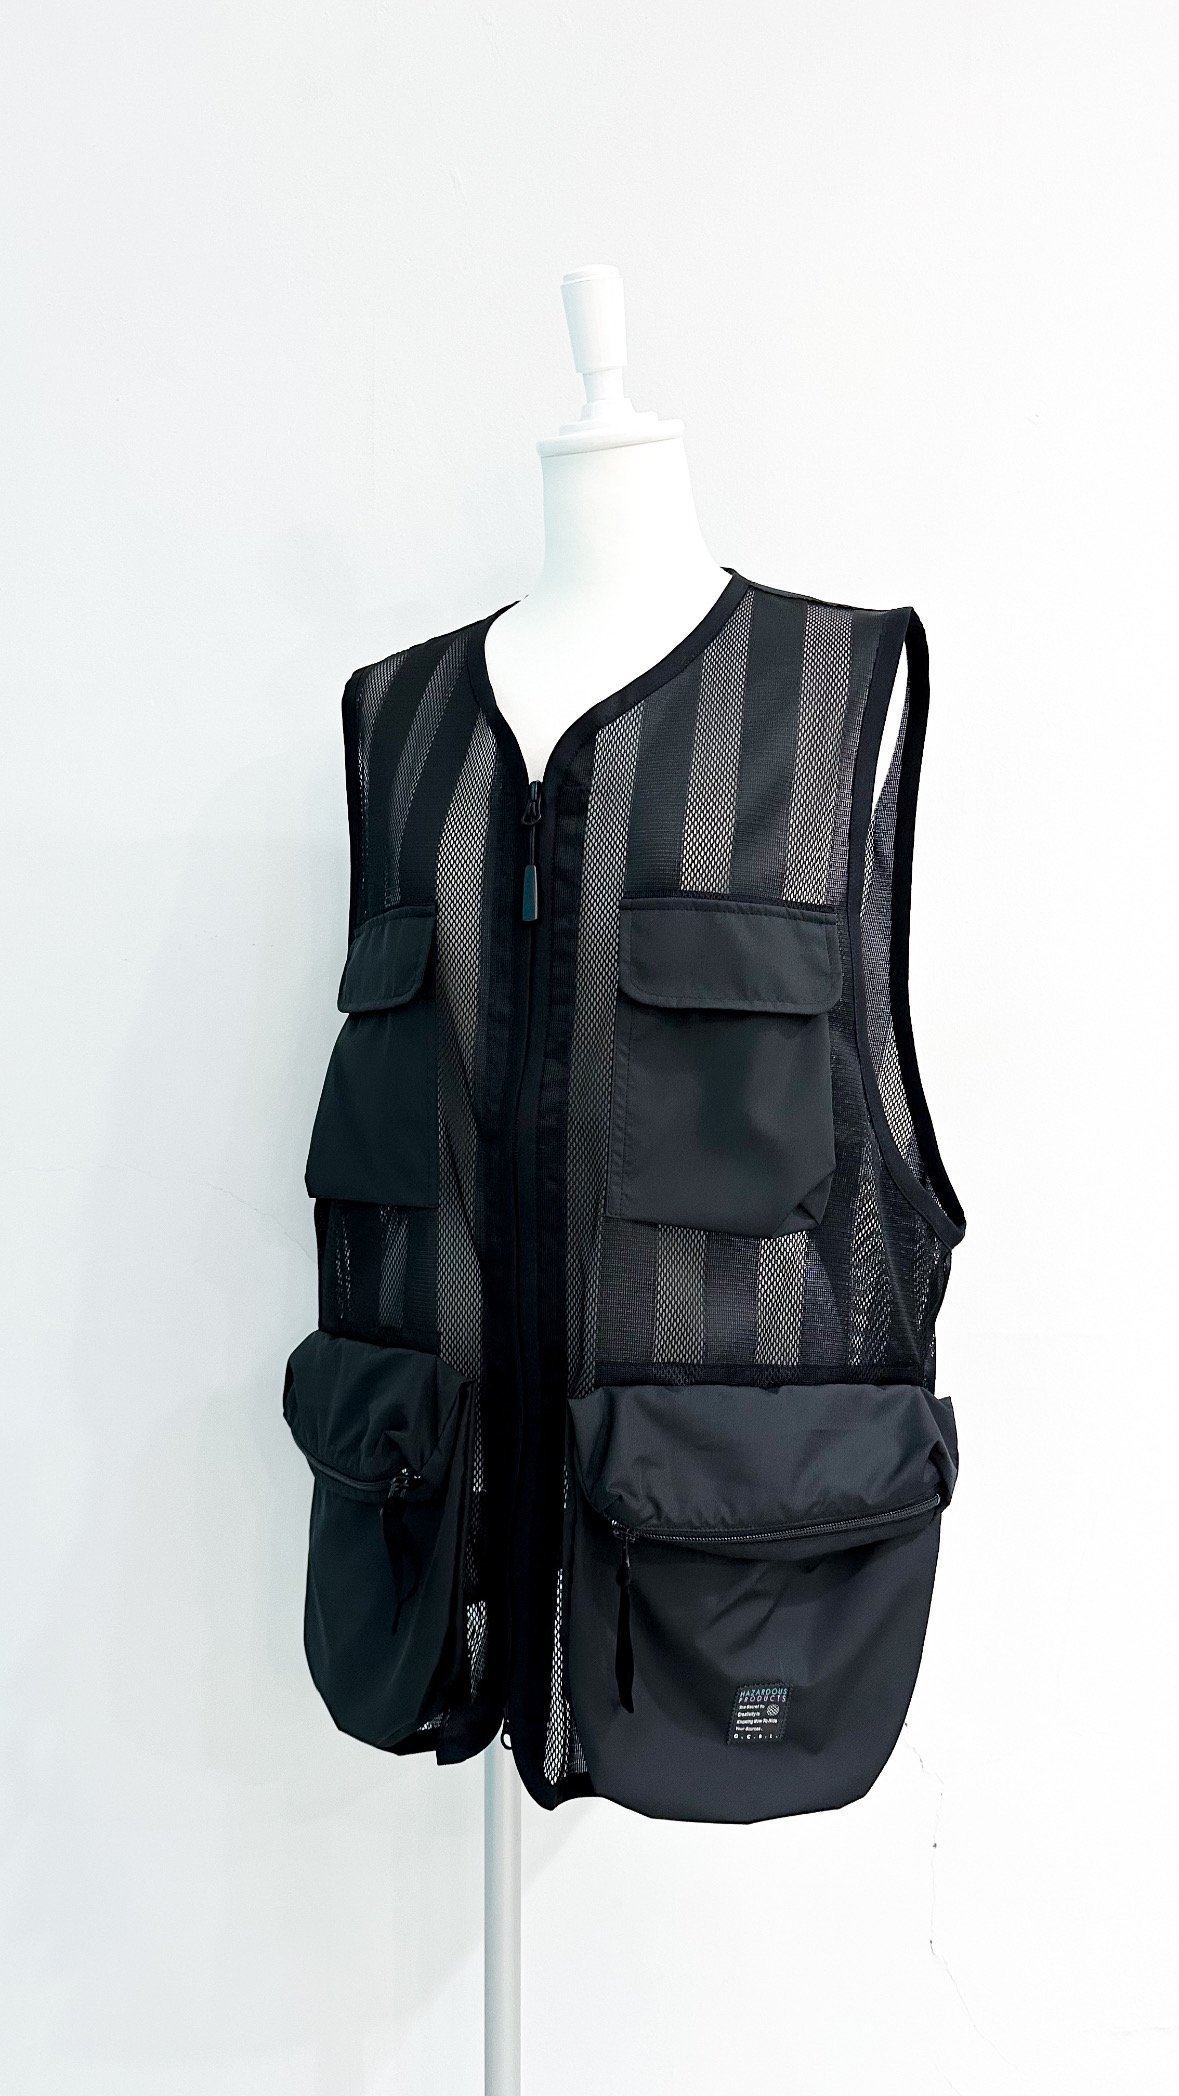 <img class='new_mark_img1' src='https://img.shop-pro.jp/img/new/icons47.gif' style='border:none;display:inline;margin:0px;padding:0px;width:auto;' />STRIPE MESH VEST